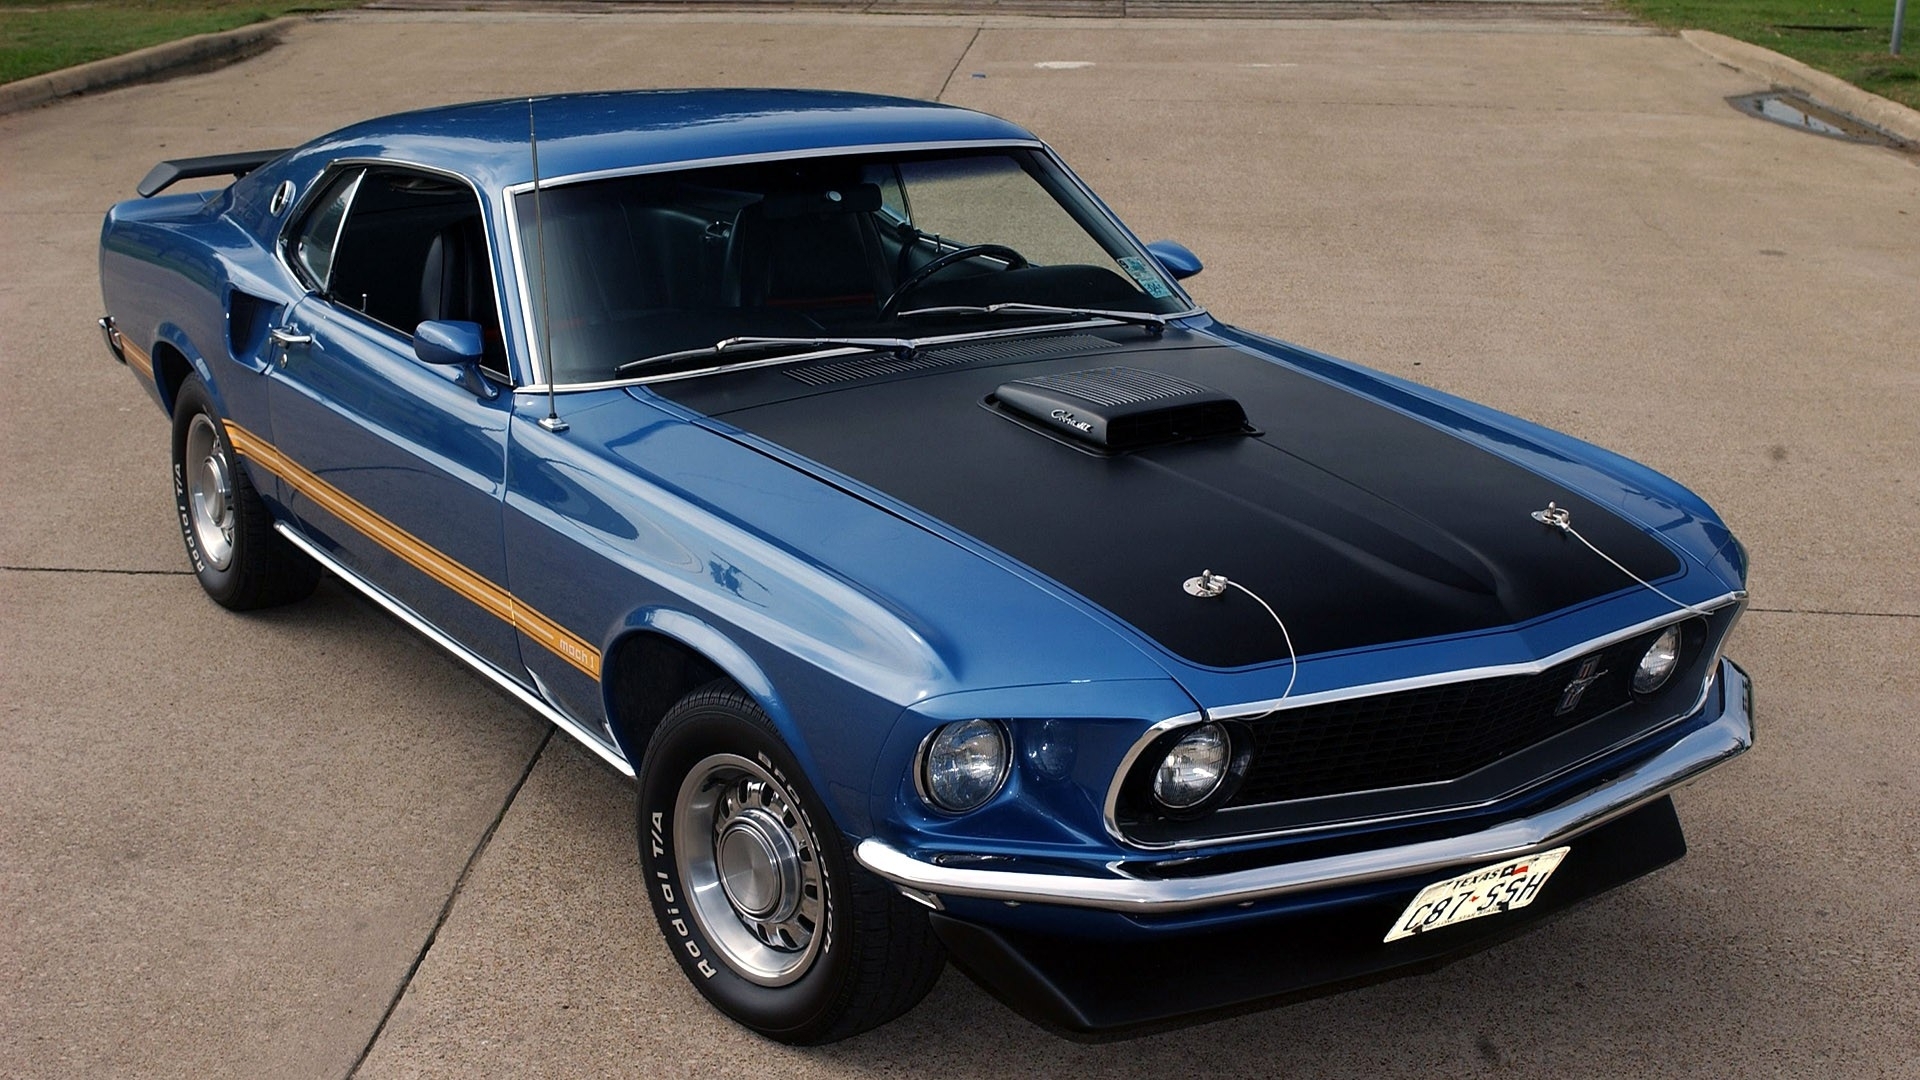 Ford Mustang Mach I Classic Cars Wallpaper